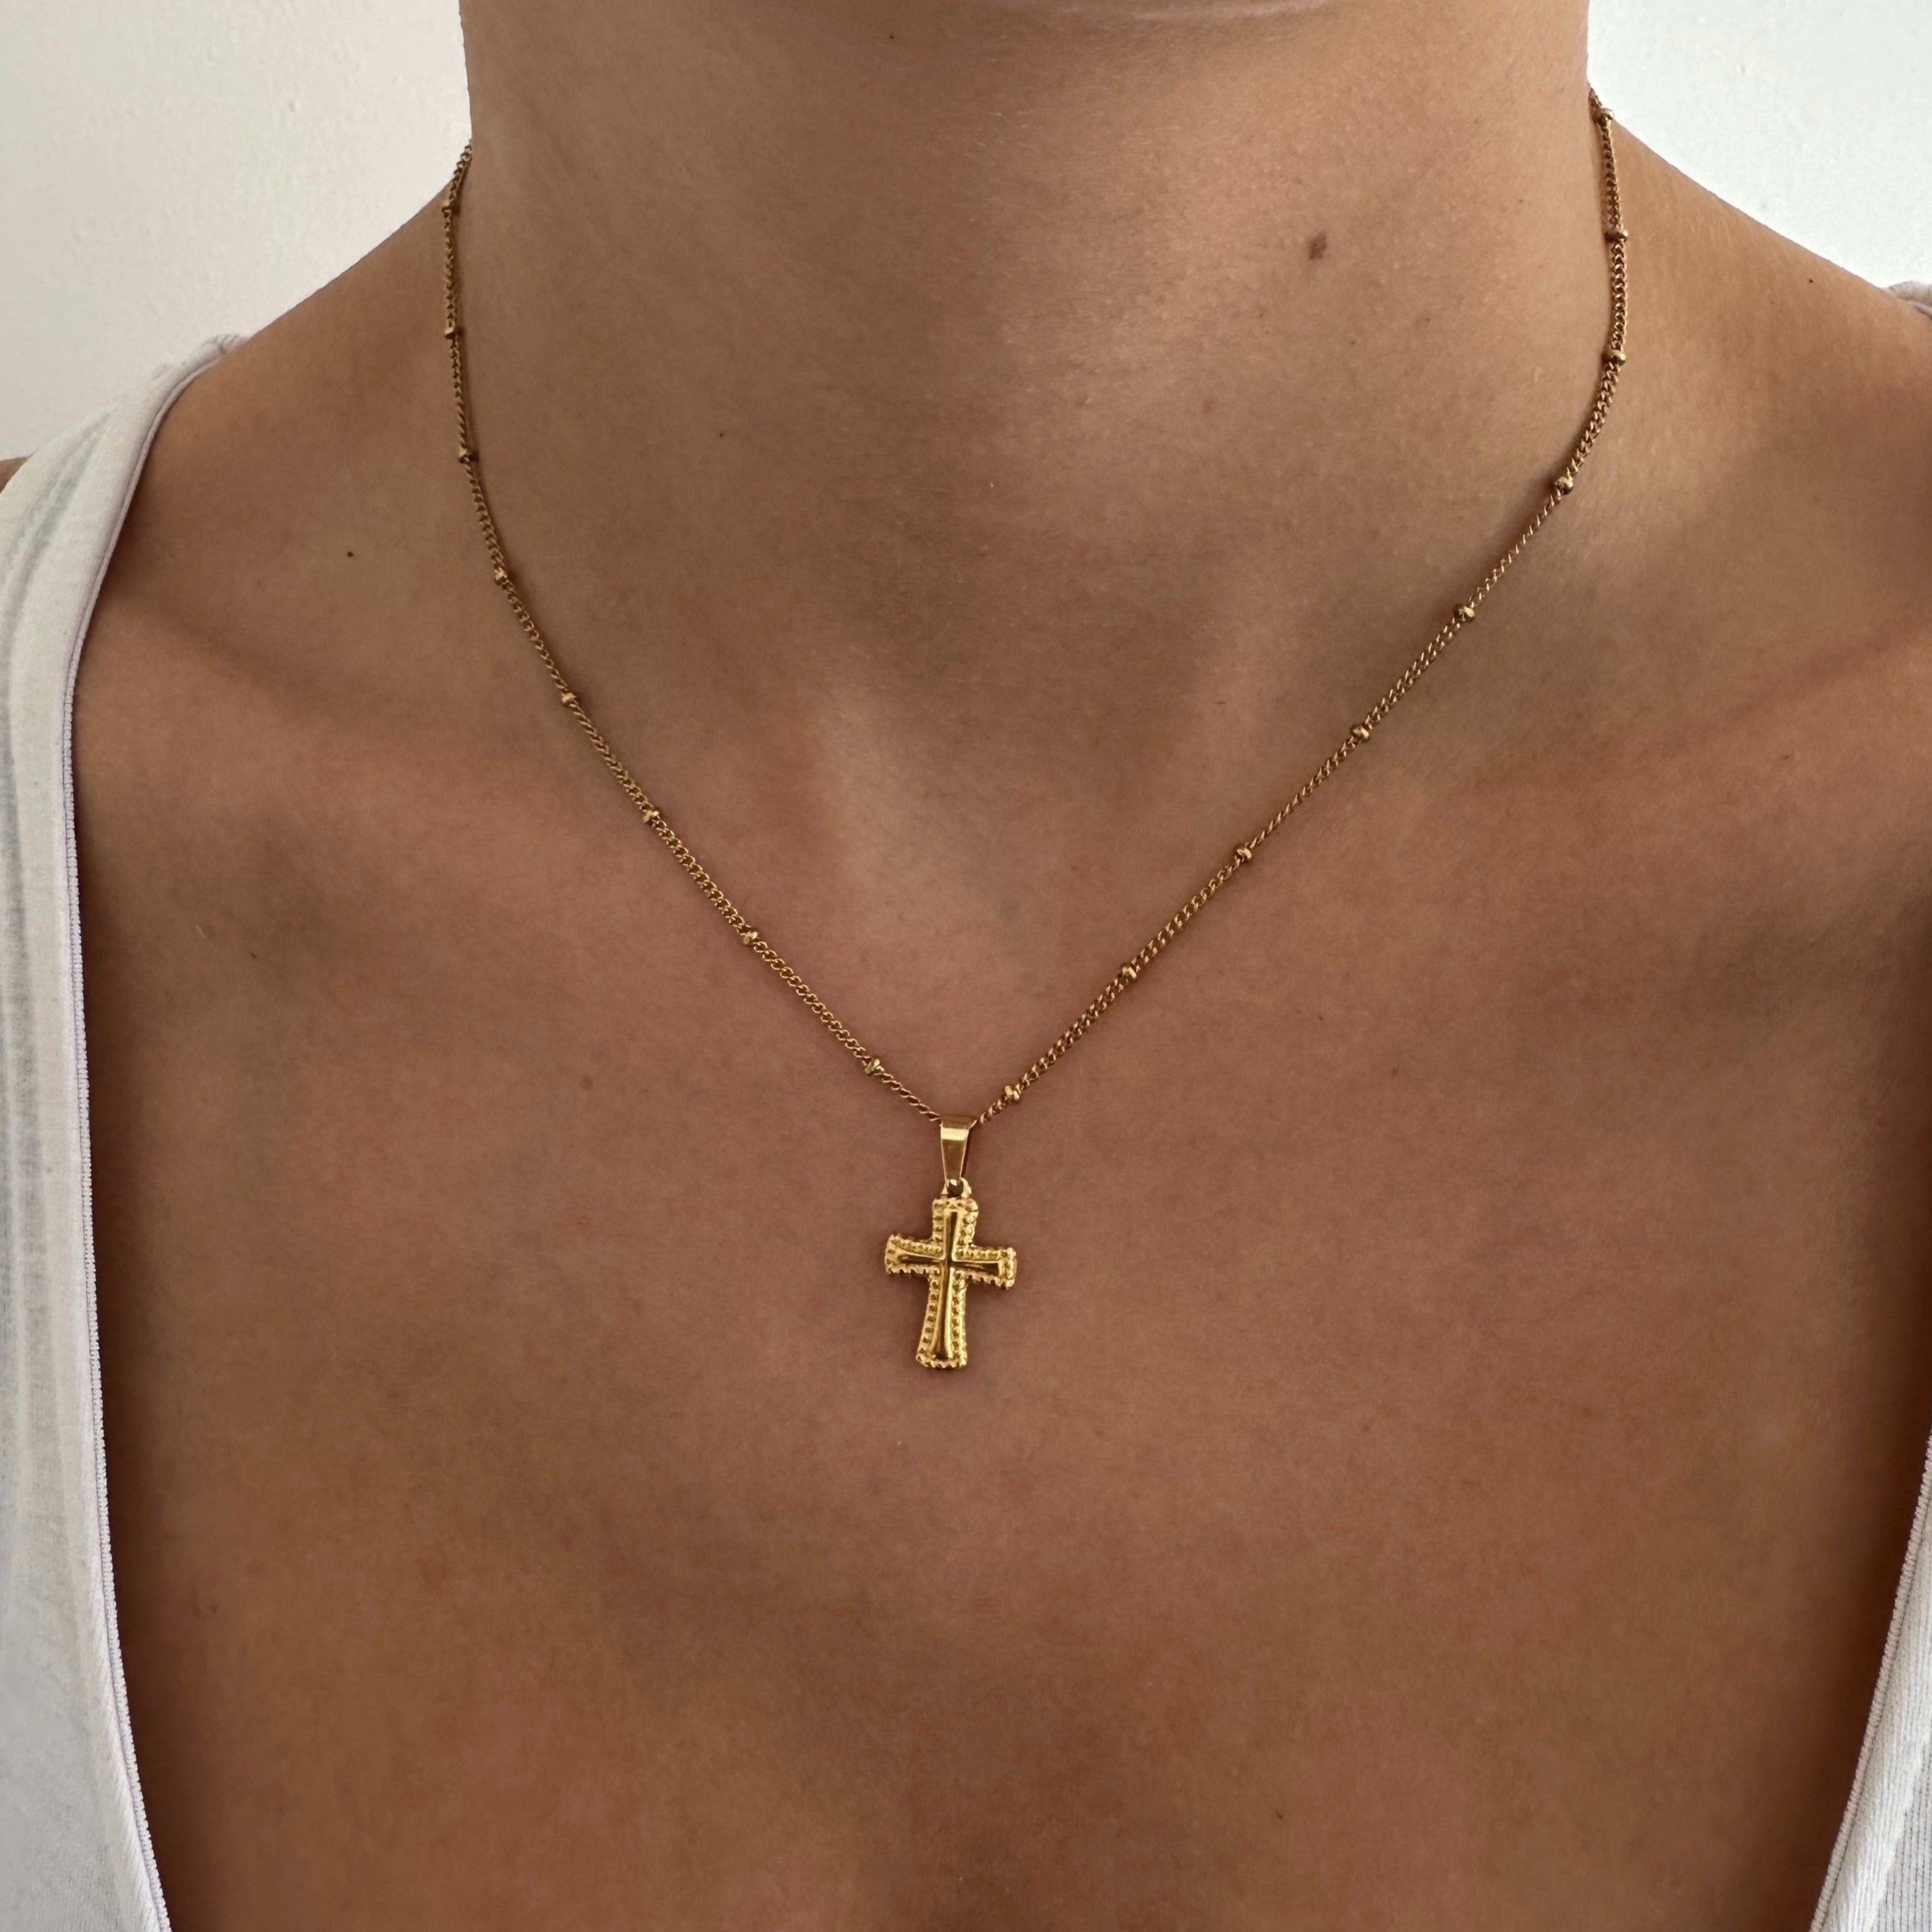 Gold Cross Pendant Necklace as a Symbol of Faith - Wear your beliefs with pride, adorned in this exquisite accessory.